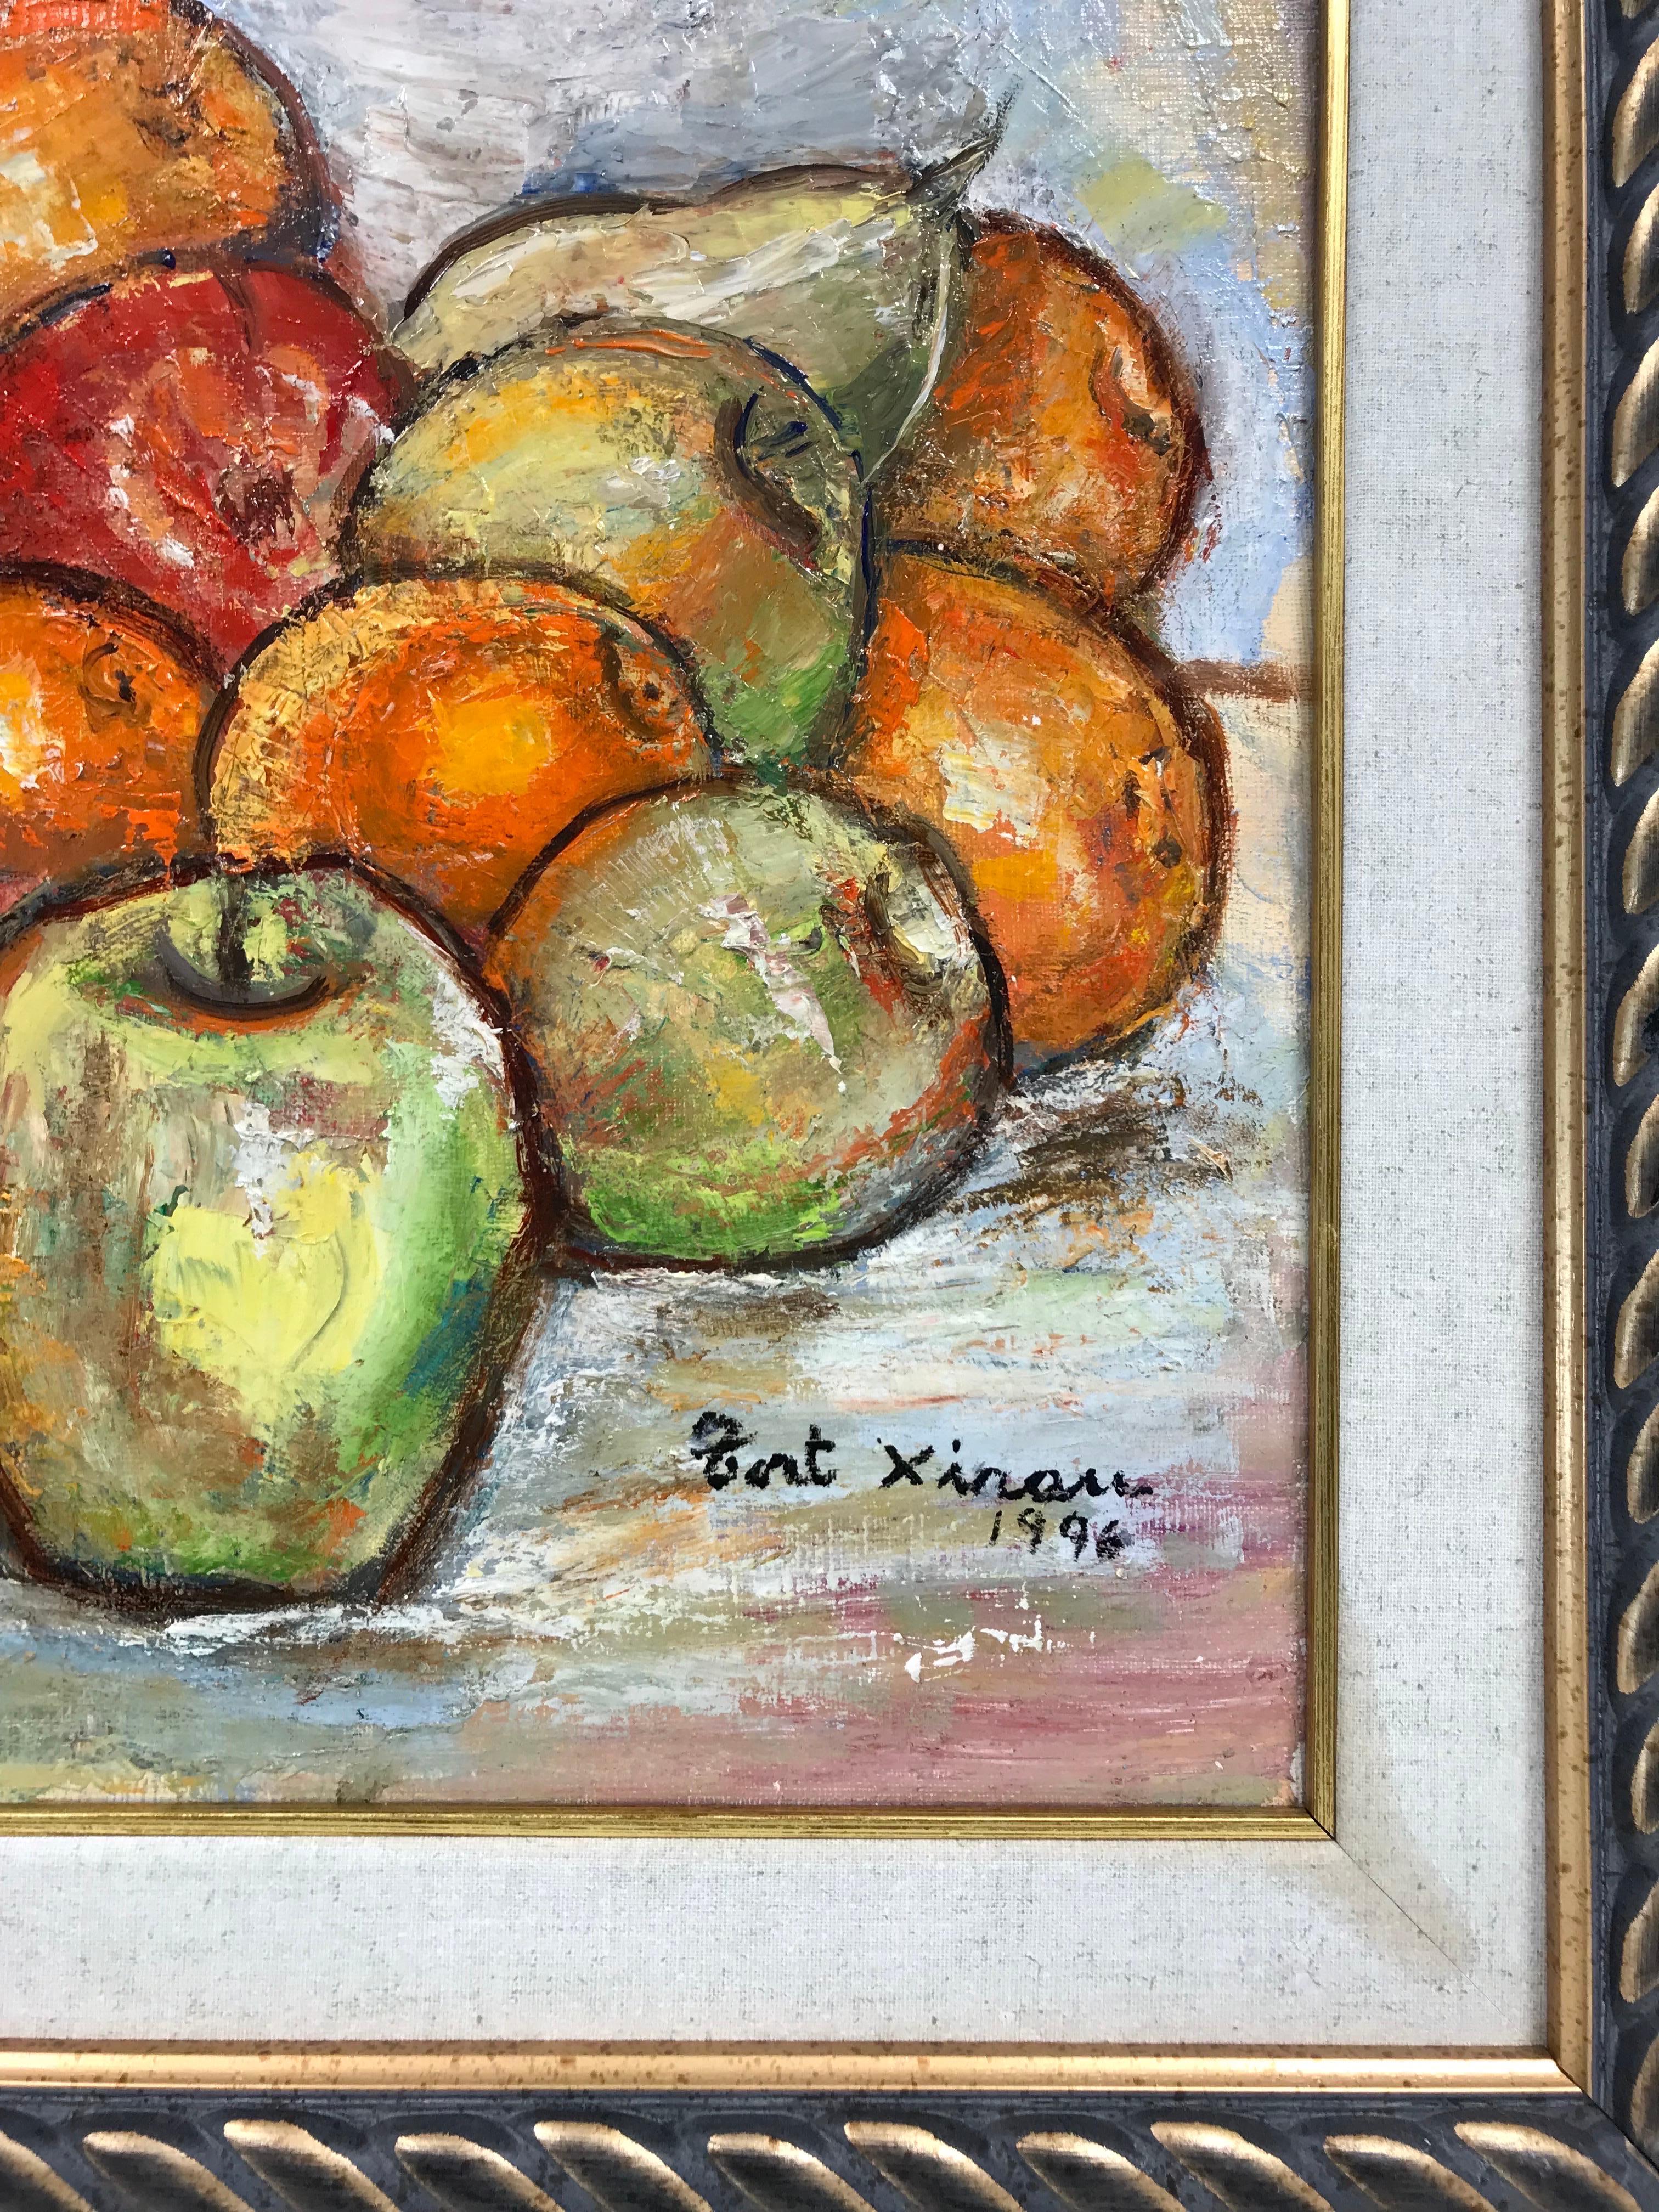 Still Life of Fruit
by Maria Tort Xirau (Catalan, 1924-2018)
signed lower corner
oil painting on canvas, framed

canvas: 13 x 18 inches
framed: 18 x 23 inches

Very good condition. 

Provenance: from the artists estate, France

Maria Tort Xirau (